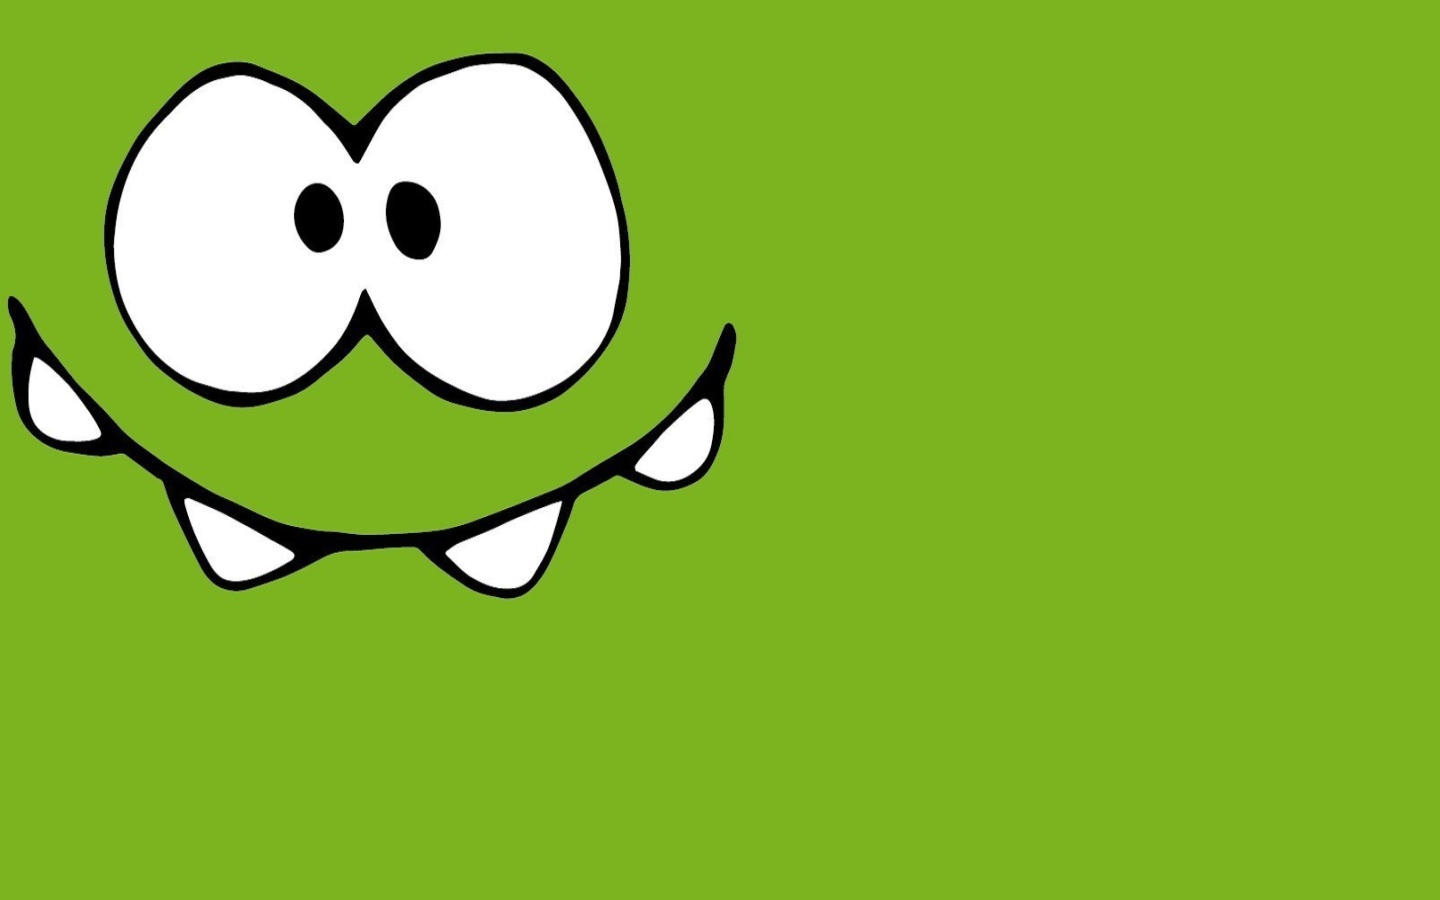 Om Nom from game Cut the Rope screenshot #1 1440x900